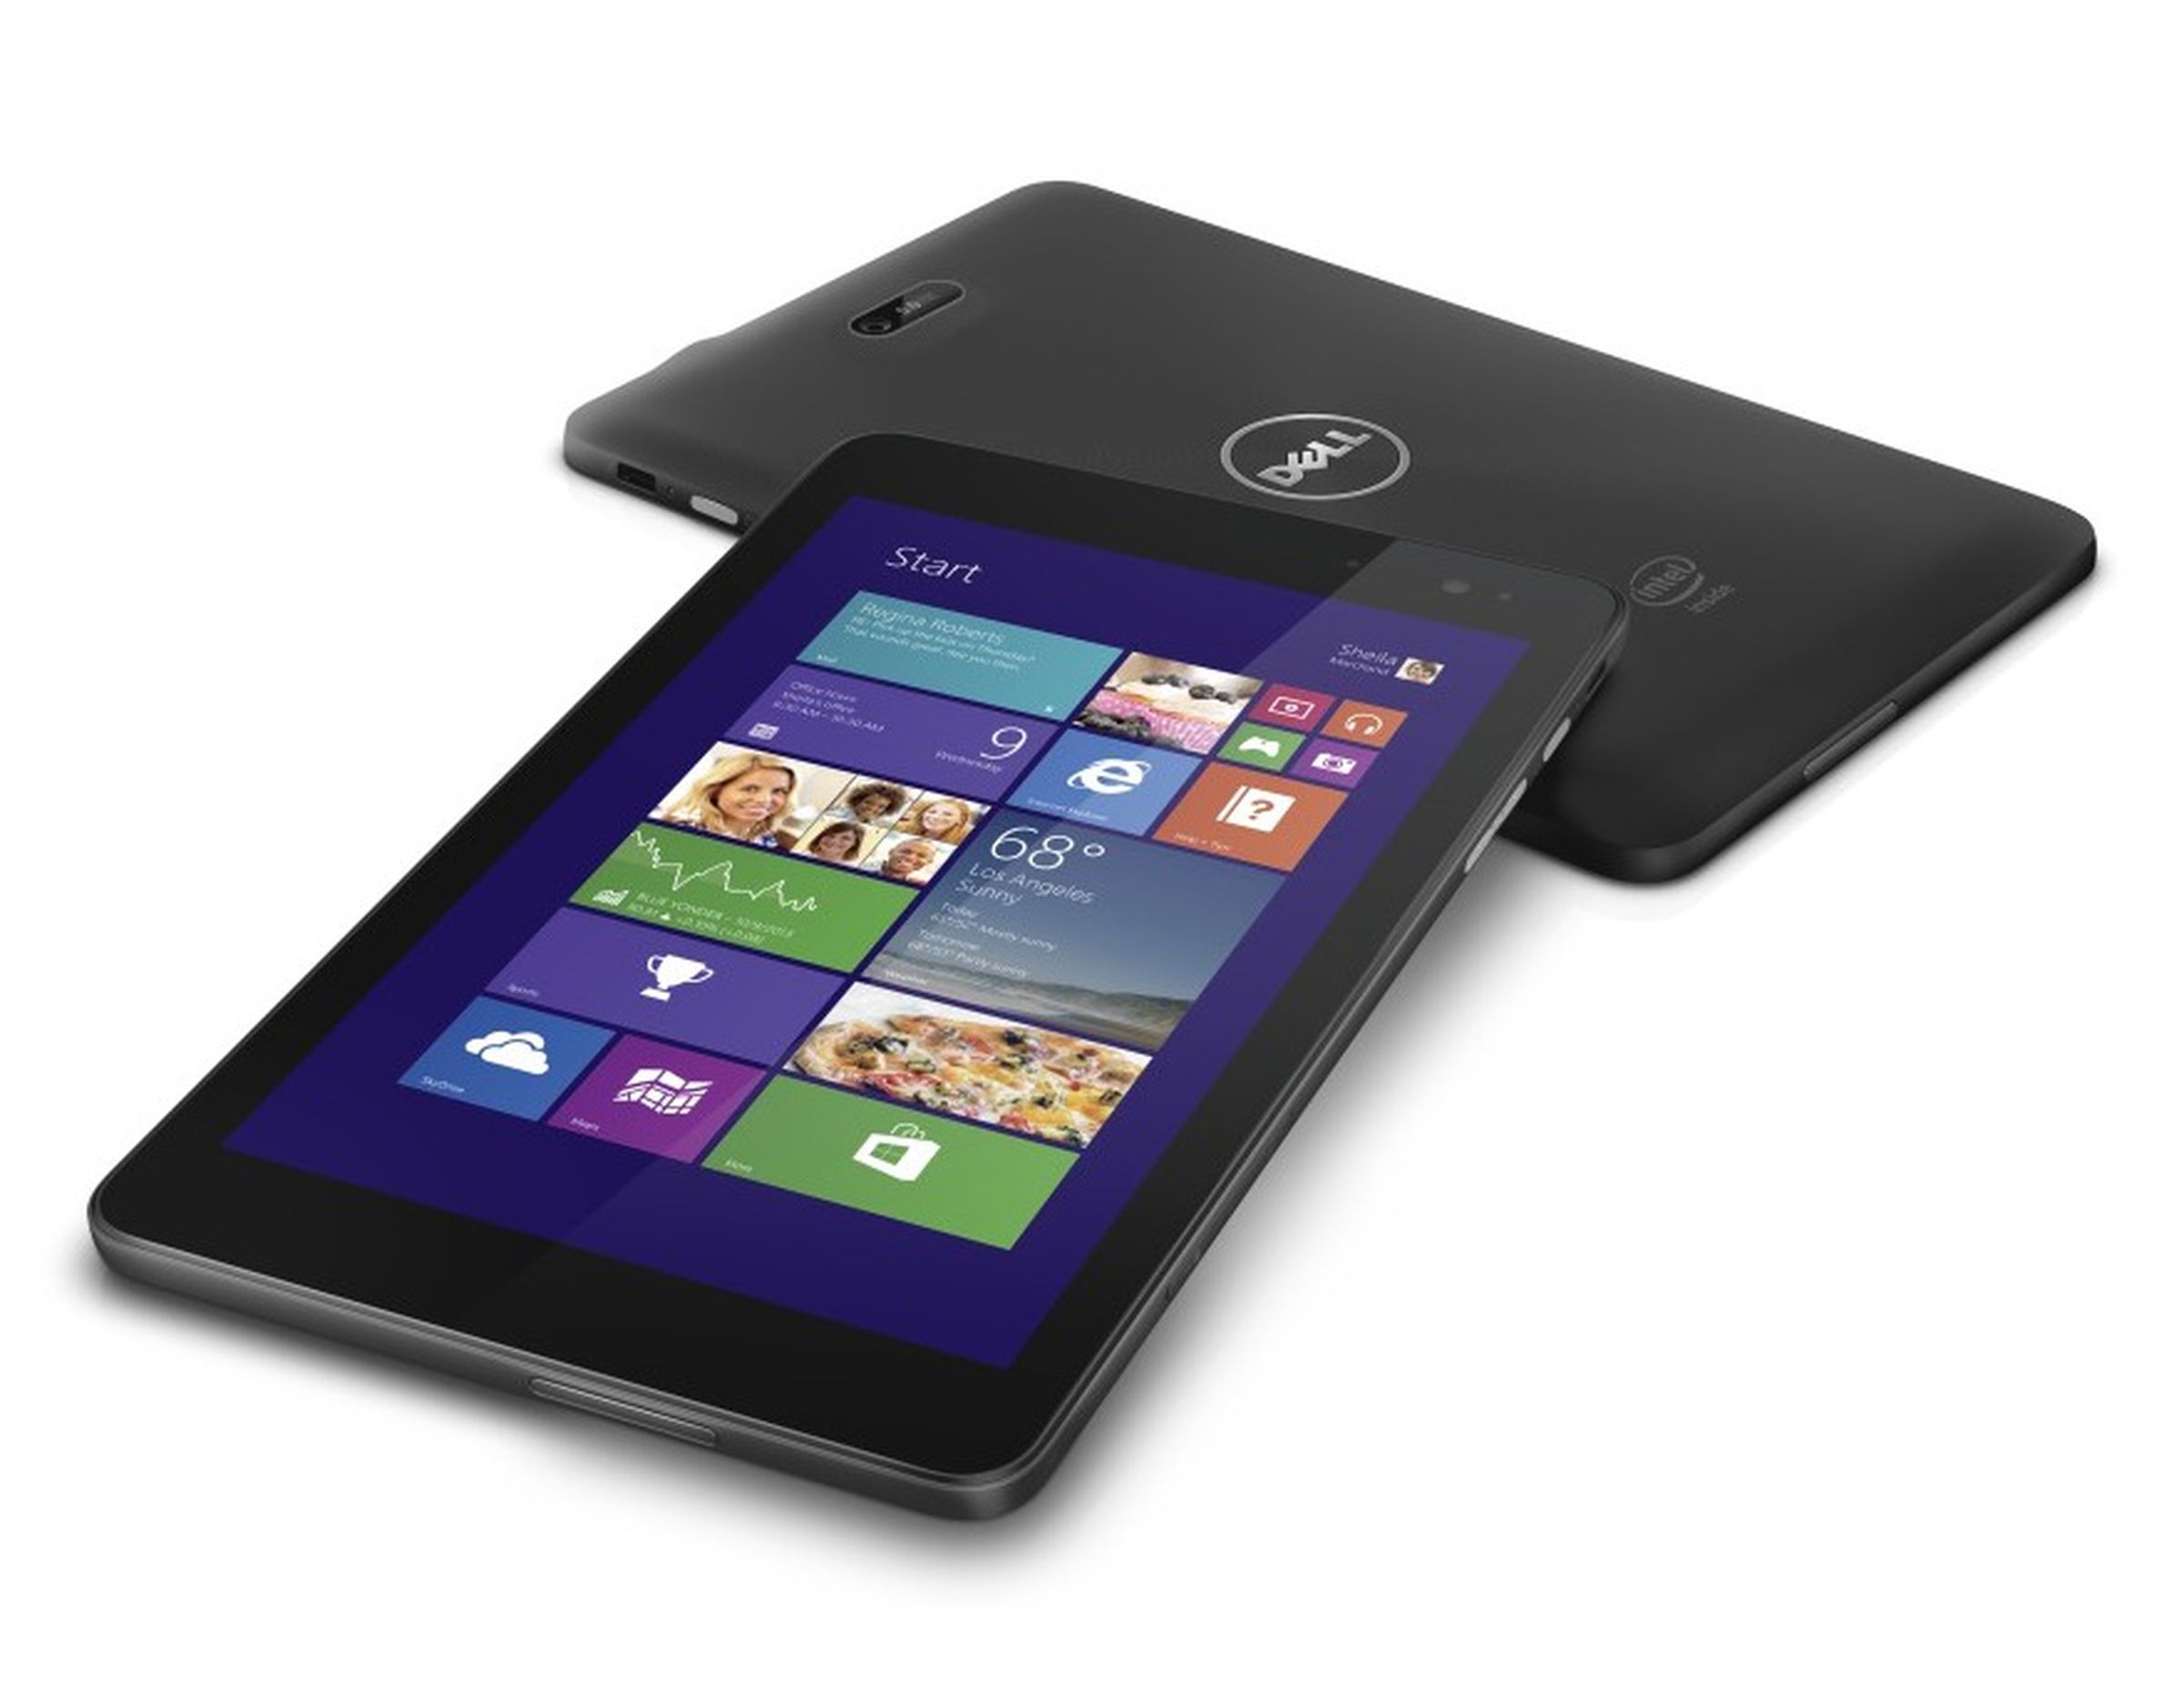 Dell Venue tablet lineup press pictures